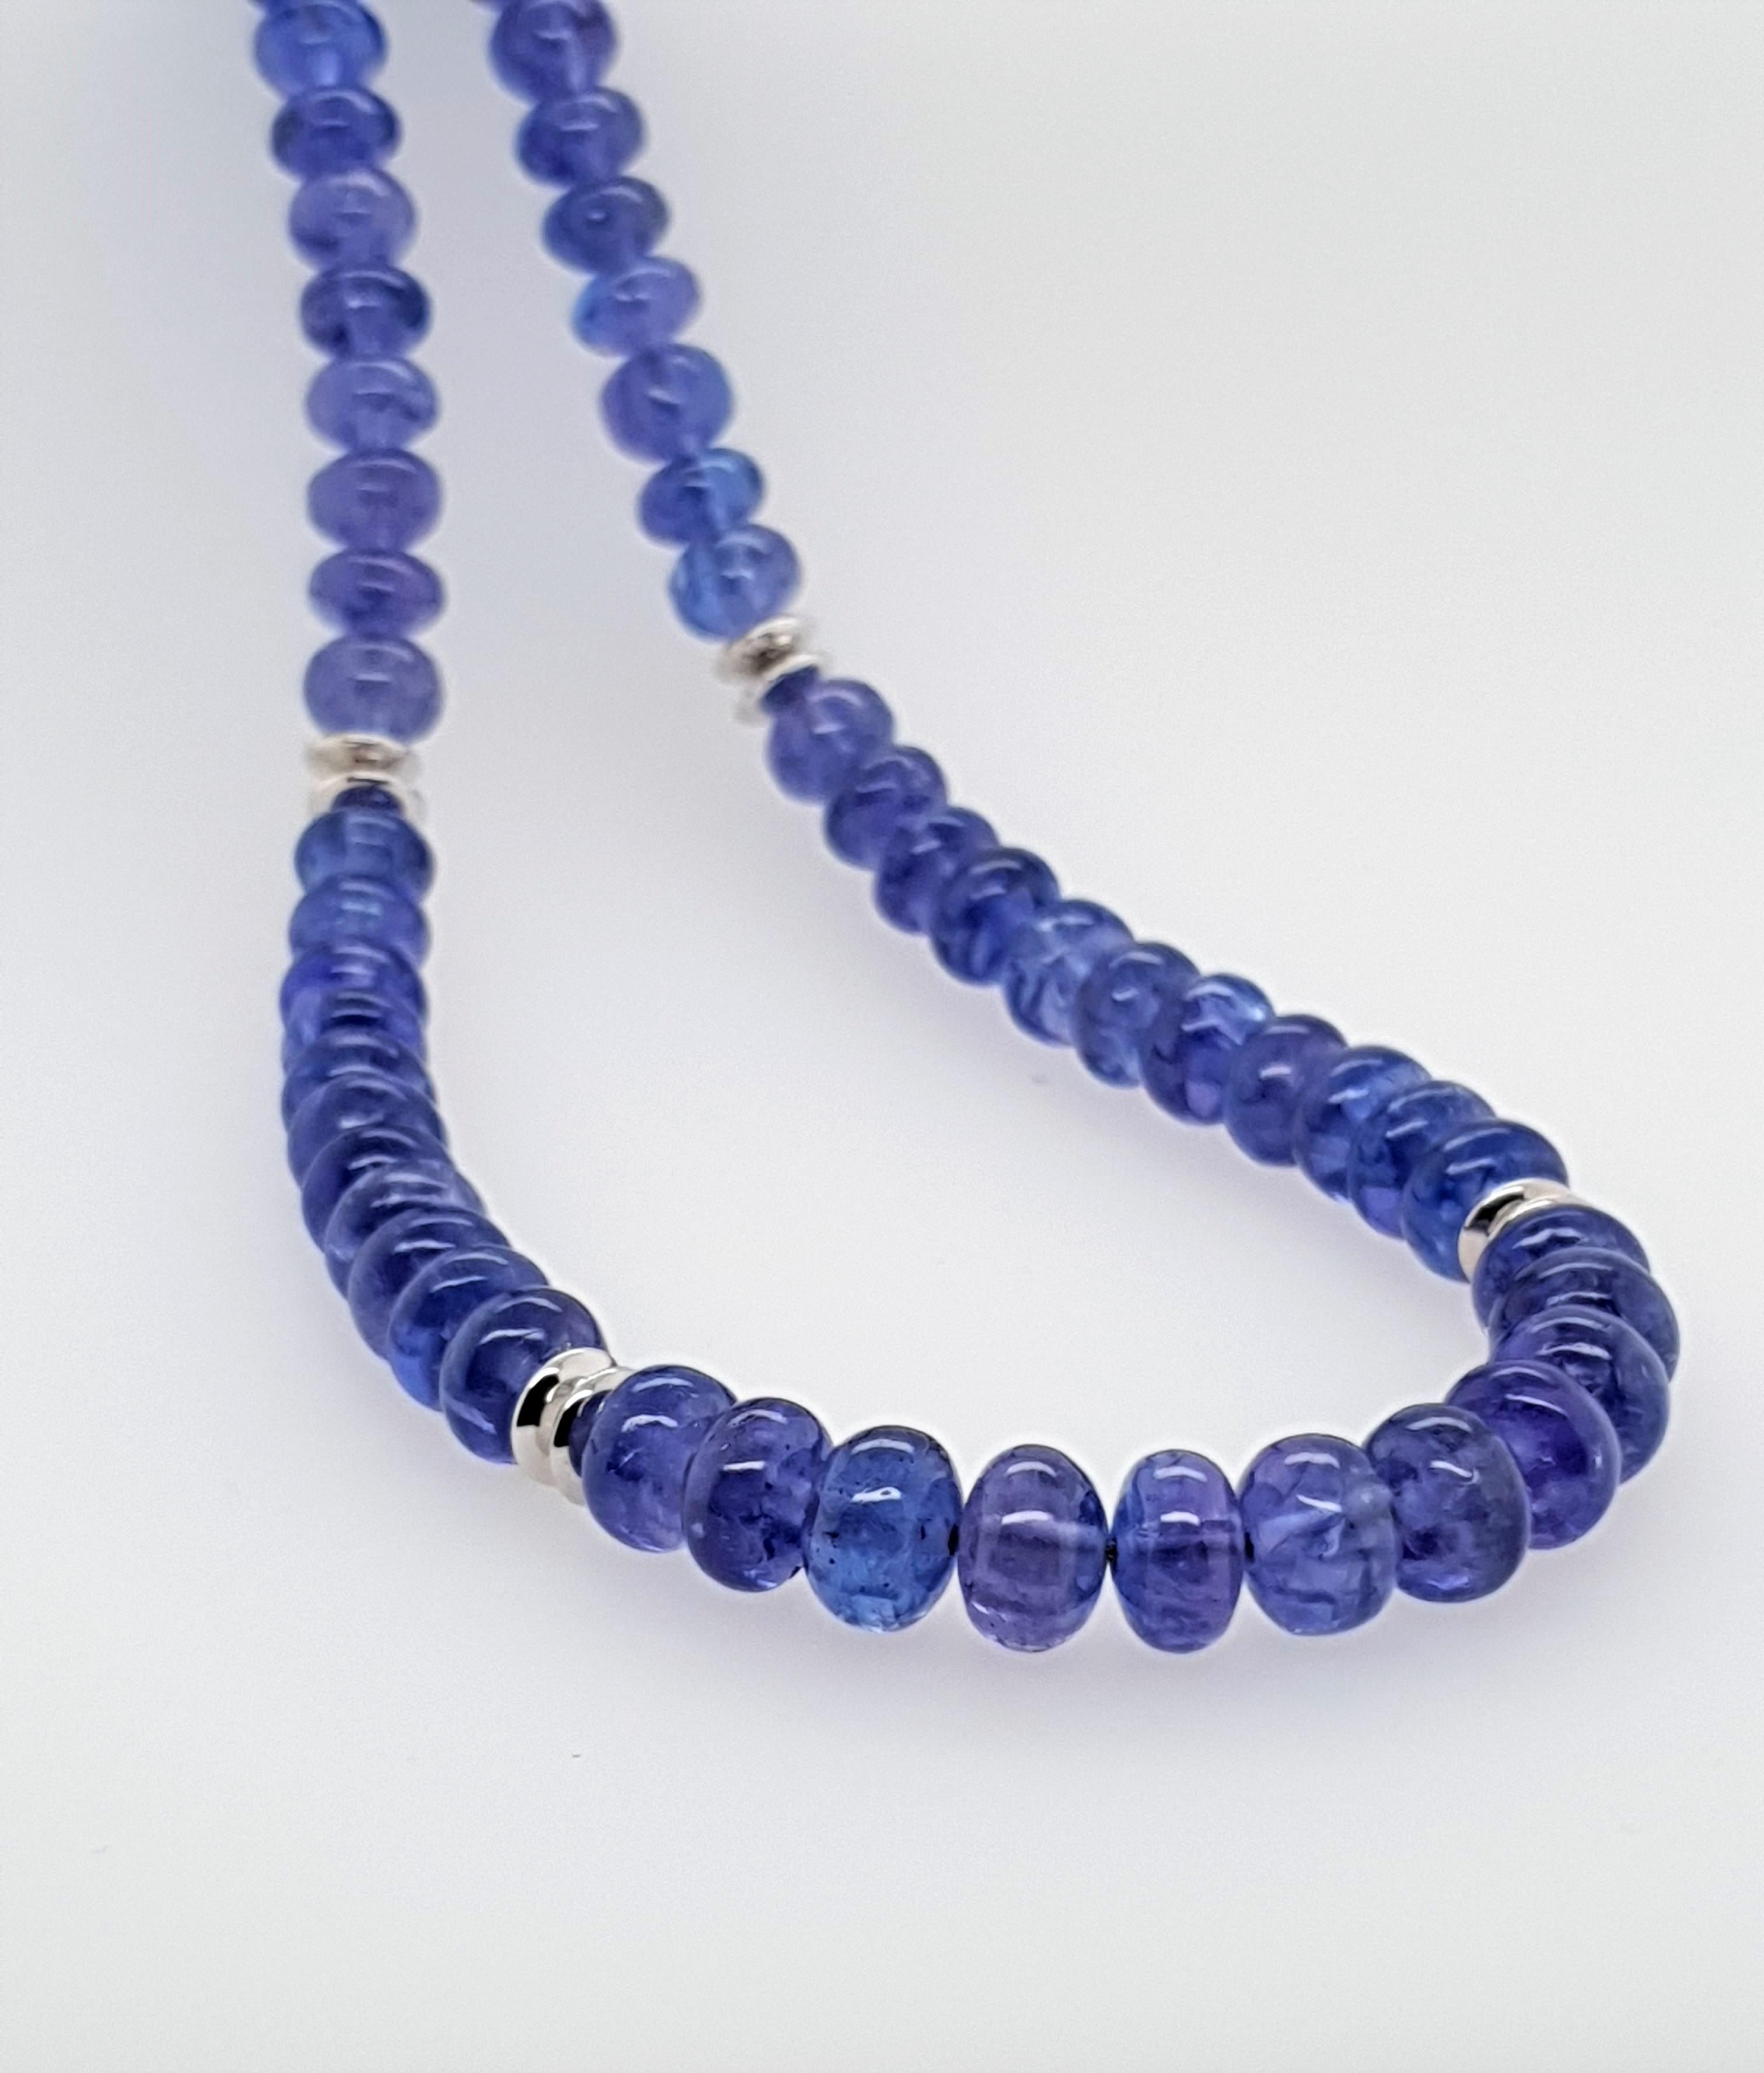 This Cornflower blue Tanzanite Rondel Beaded Necklace with 18 Carat white Gold is totally handmade. Cutting as well as goldwork are made in German quality. The screw clasp is easy to handle and very secure.
Timeless and classic design combined with